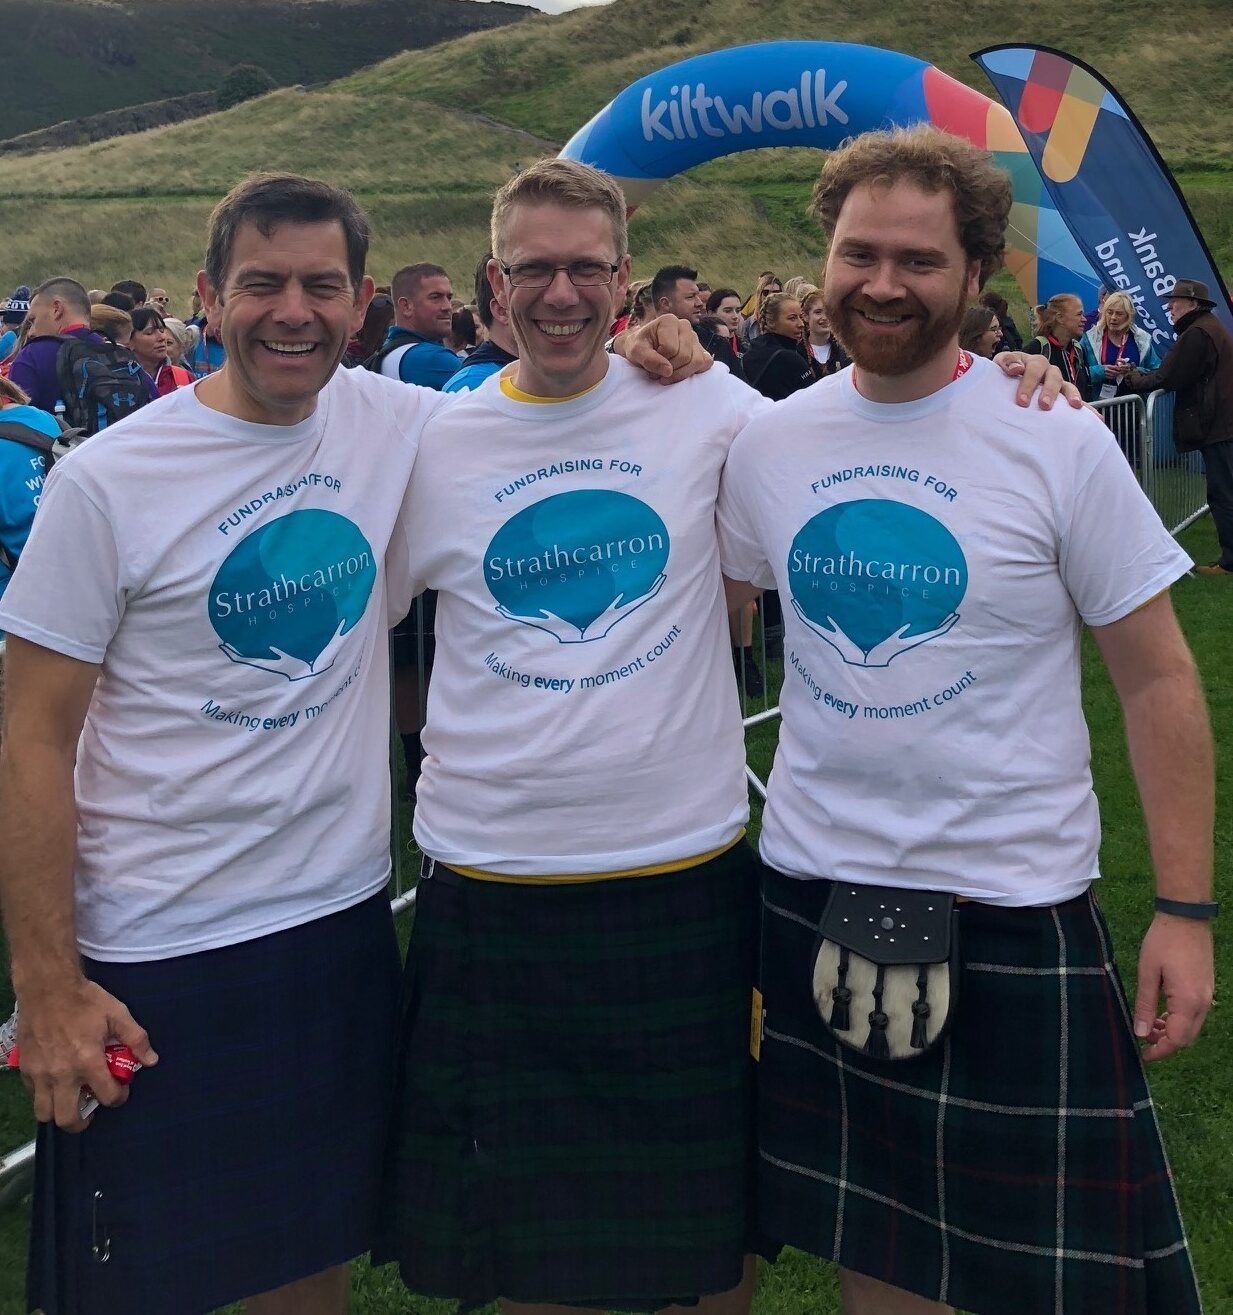 Kiltwalk 2019: These Boots are Made for Walking…We Hope!